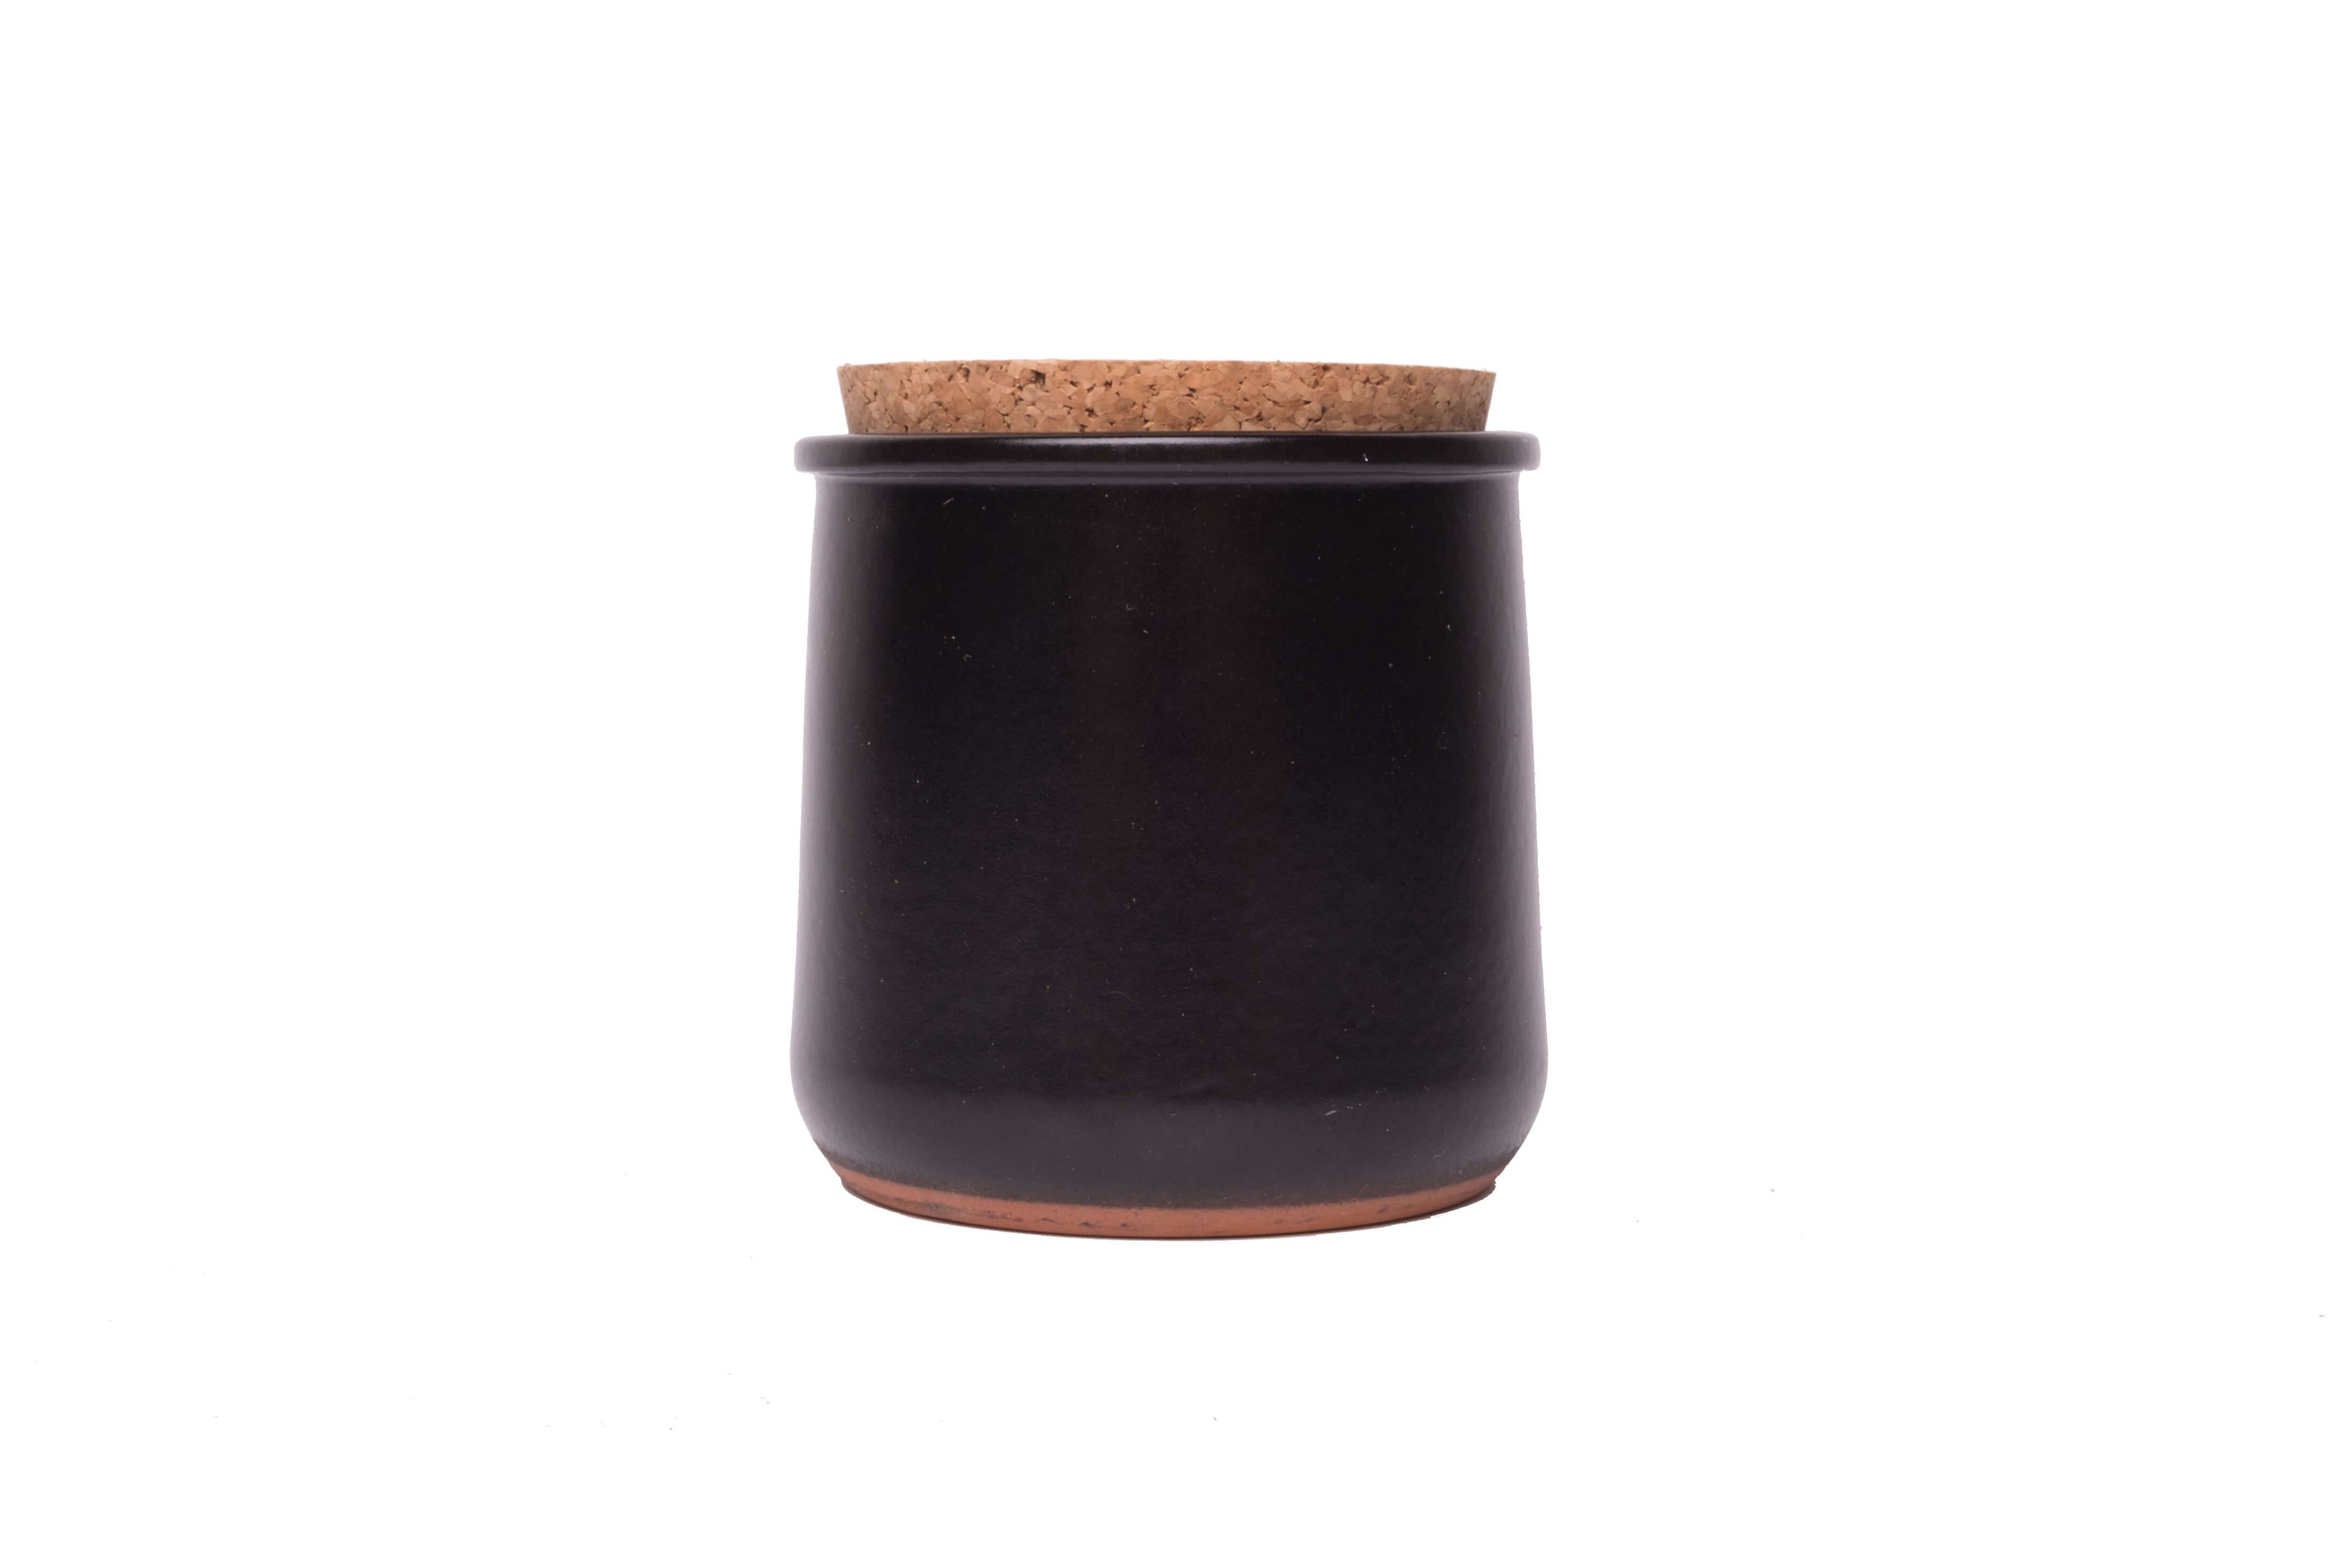 Ceramic aroma protection box with cork lid